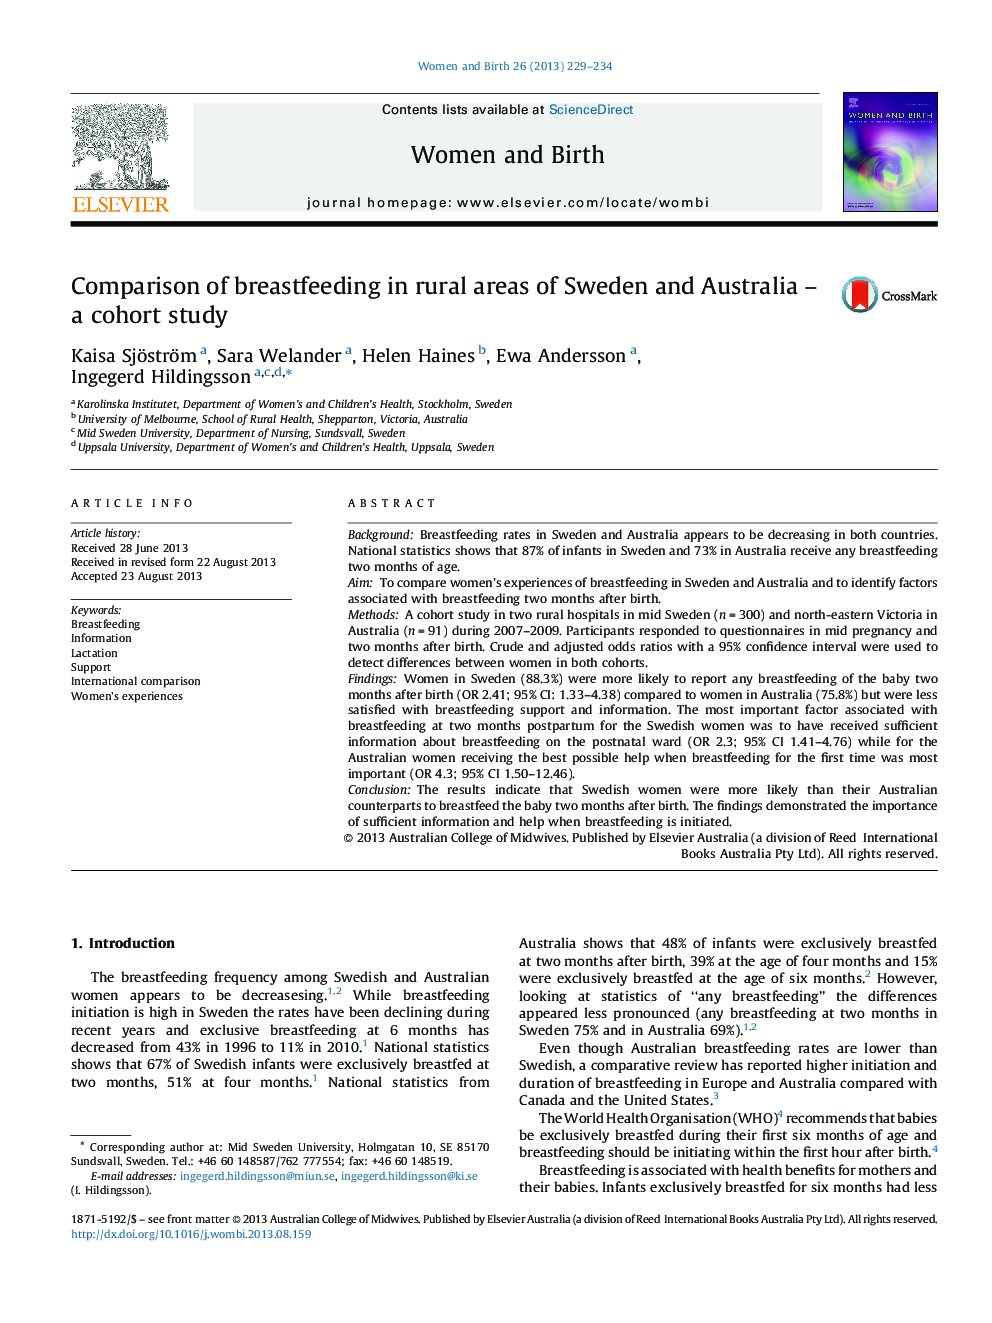 Comparison of breastfeeding in rural areas of Sweden and Australia – a cohort study